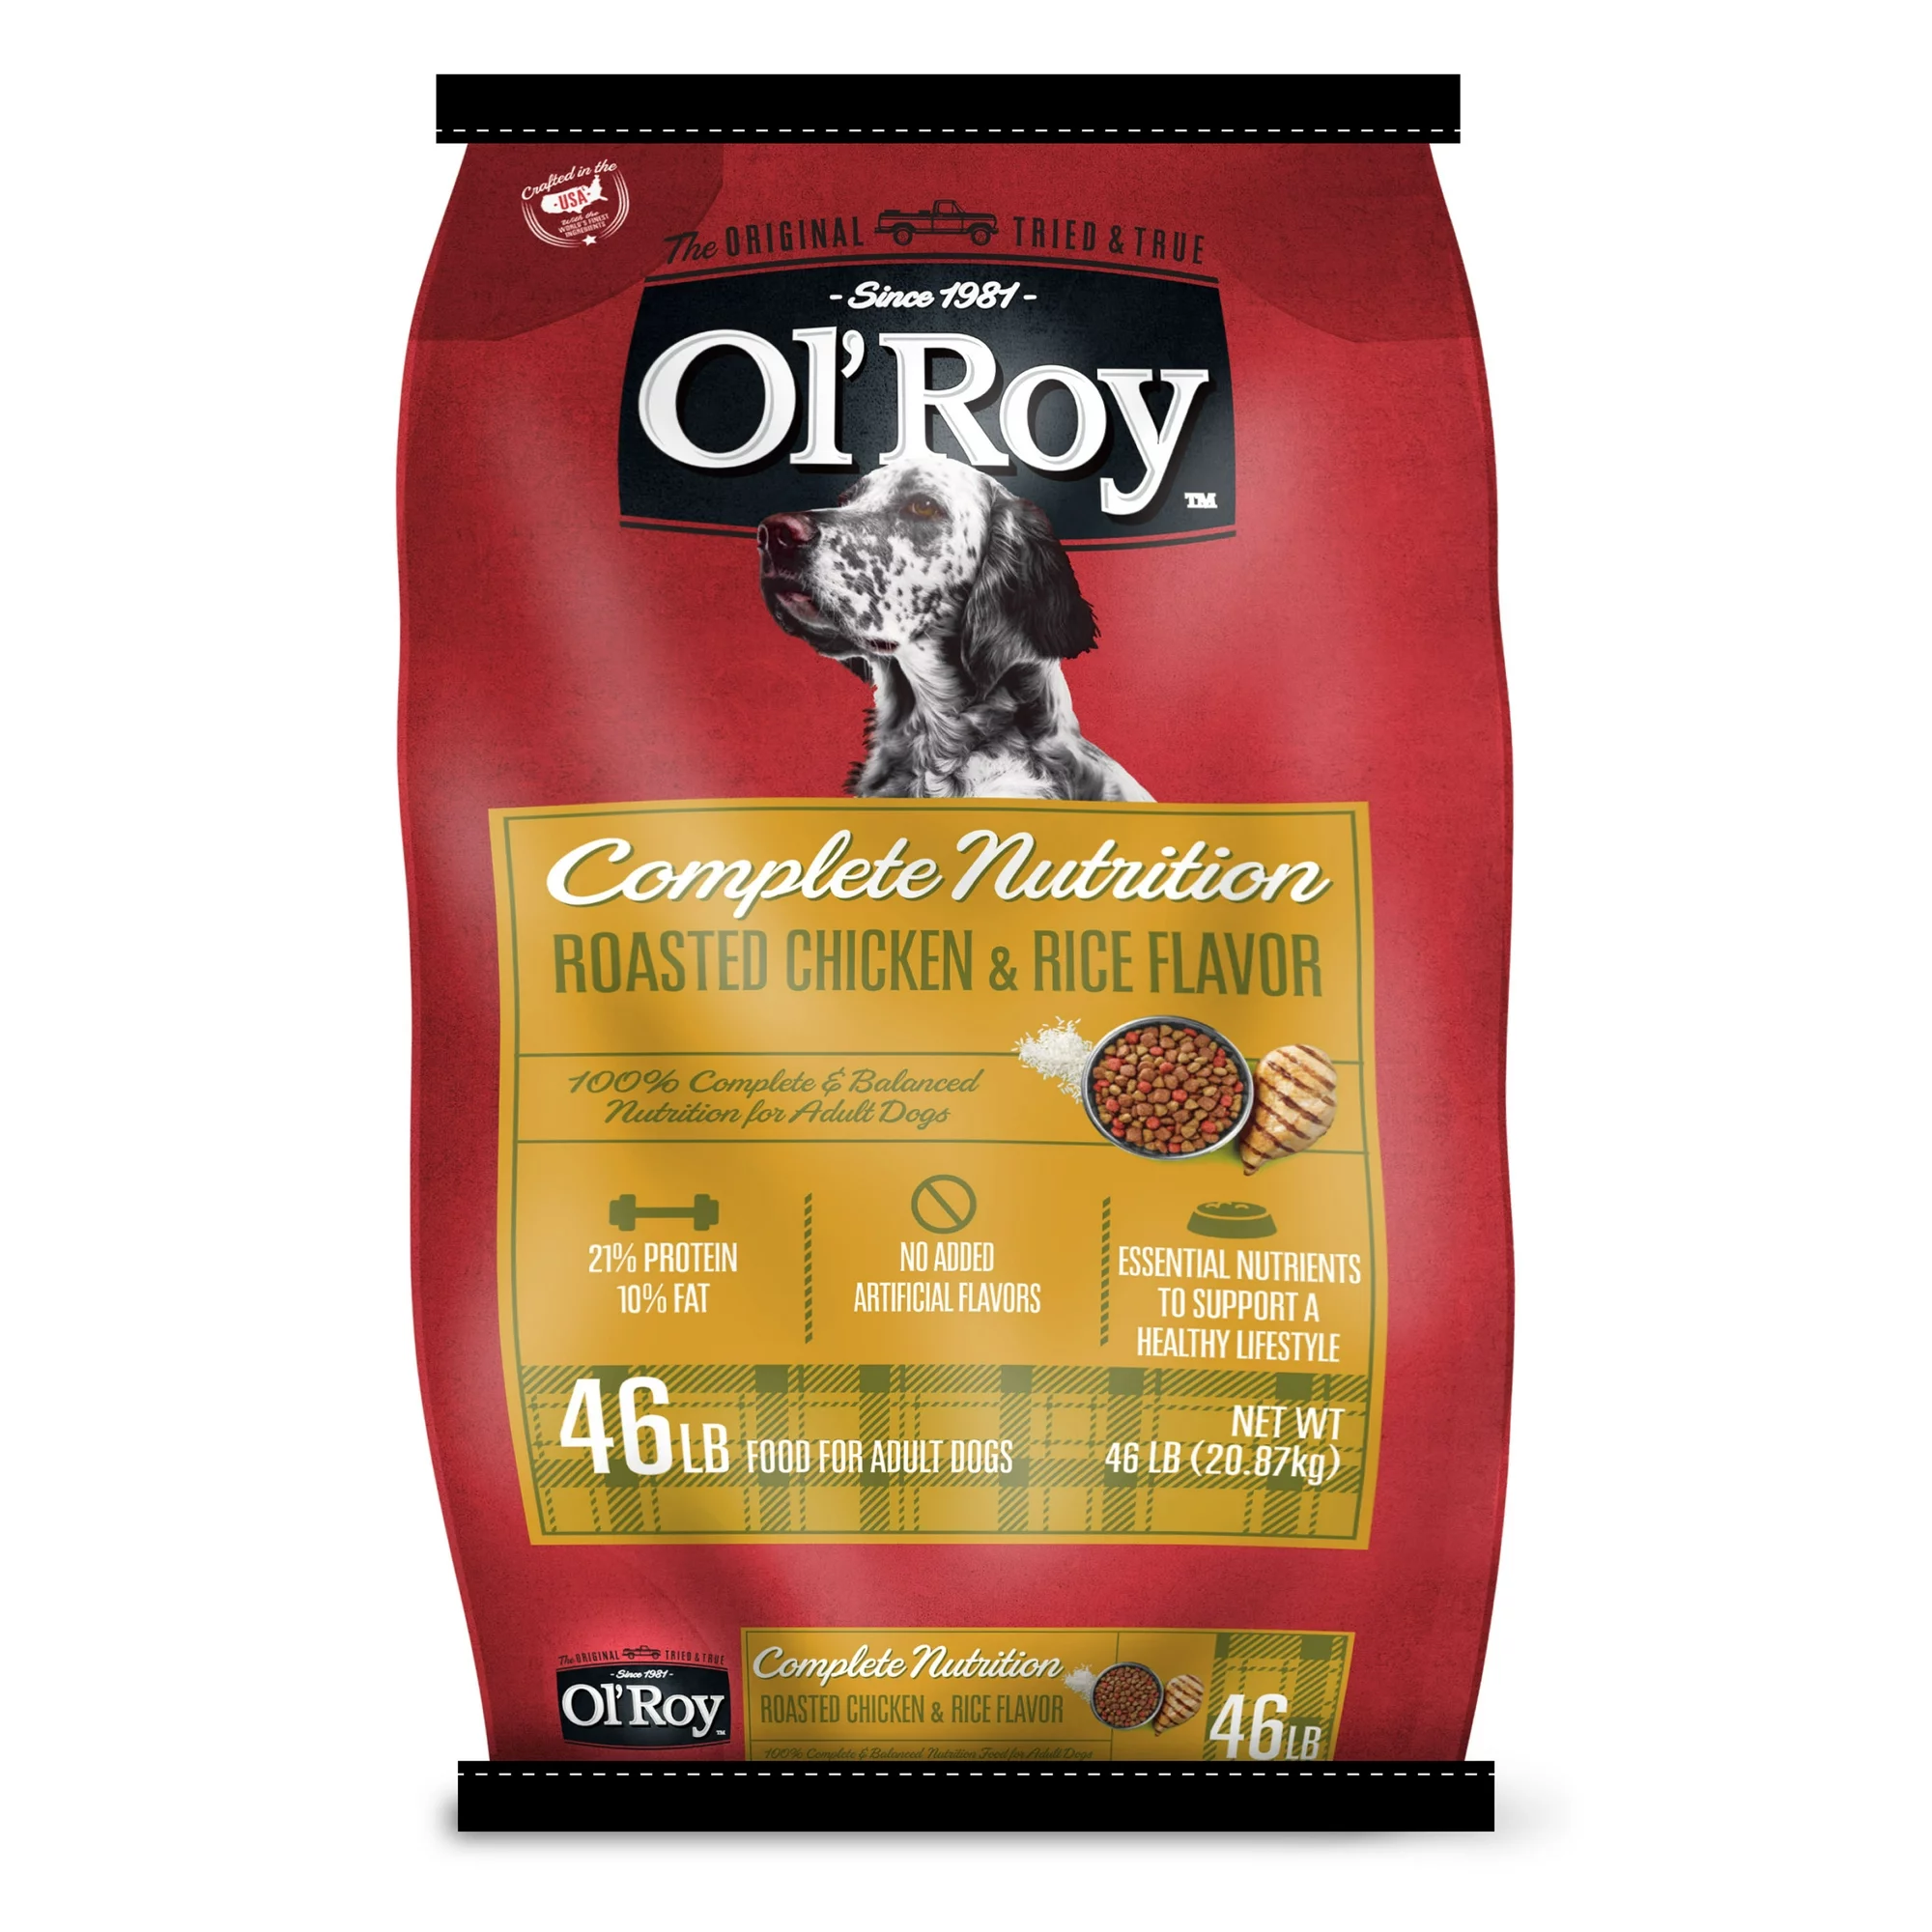 Ol Roy Complete Nutrition Roasted Chicken Rice Flavor Dry Dog Food 46lb Bag 108e6d67 25bb 489a 9ea8 251db5182687.cf9348f26fd8d80d2edf150b941d19dd